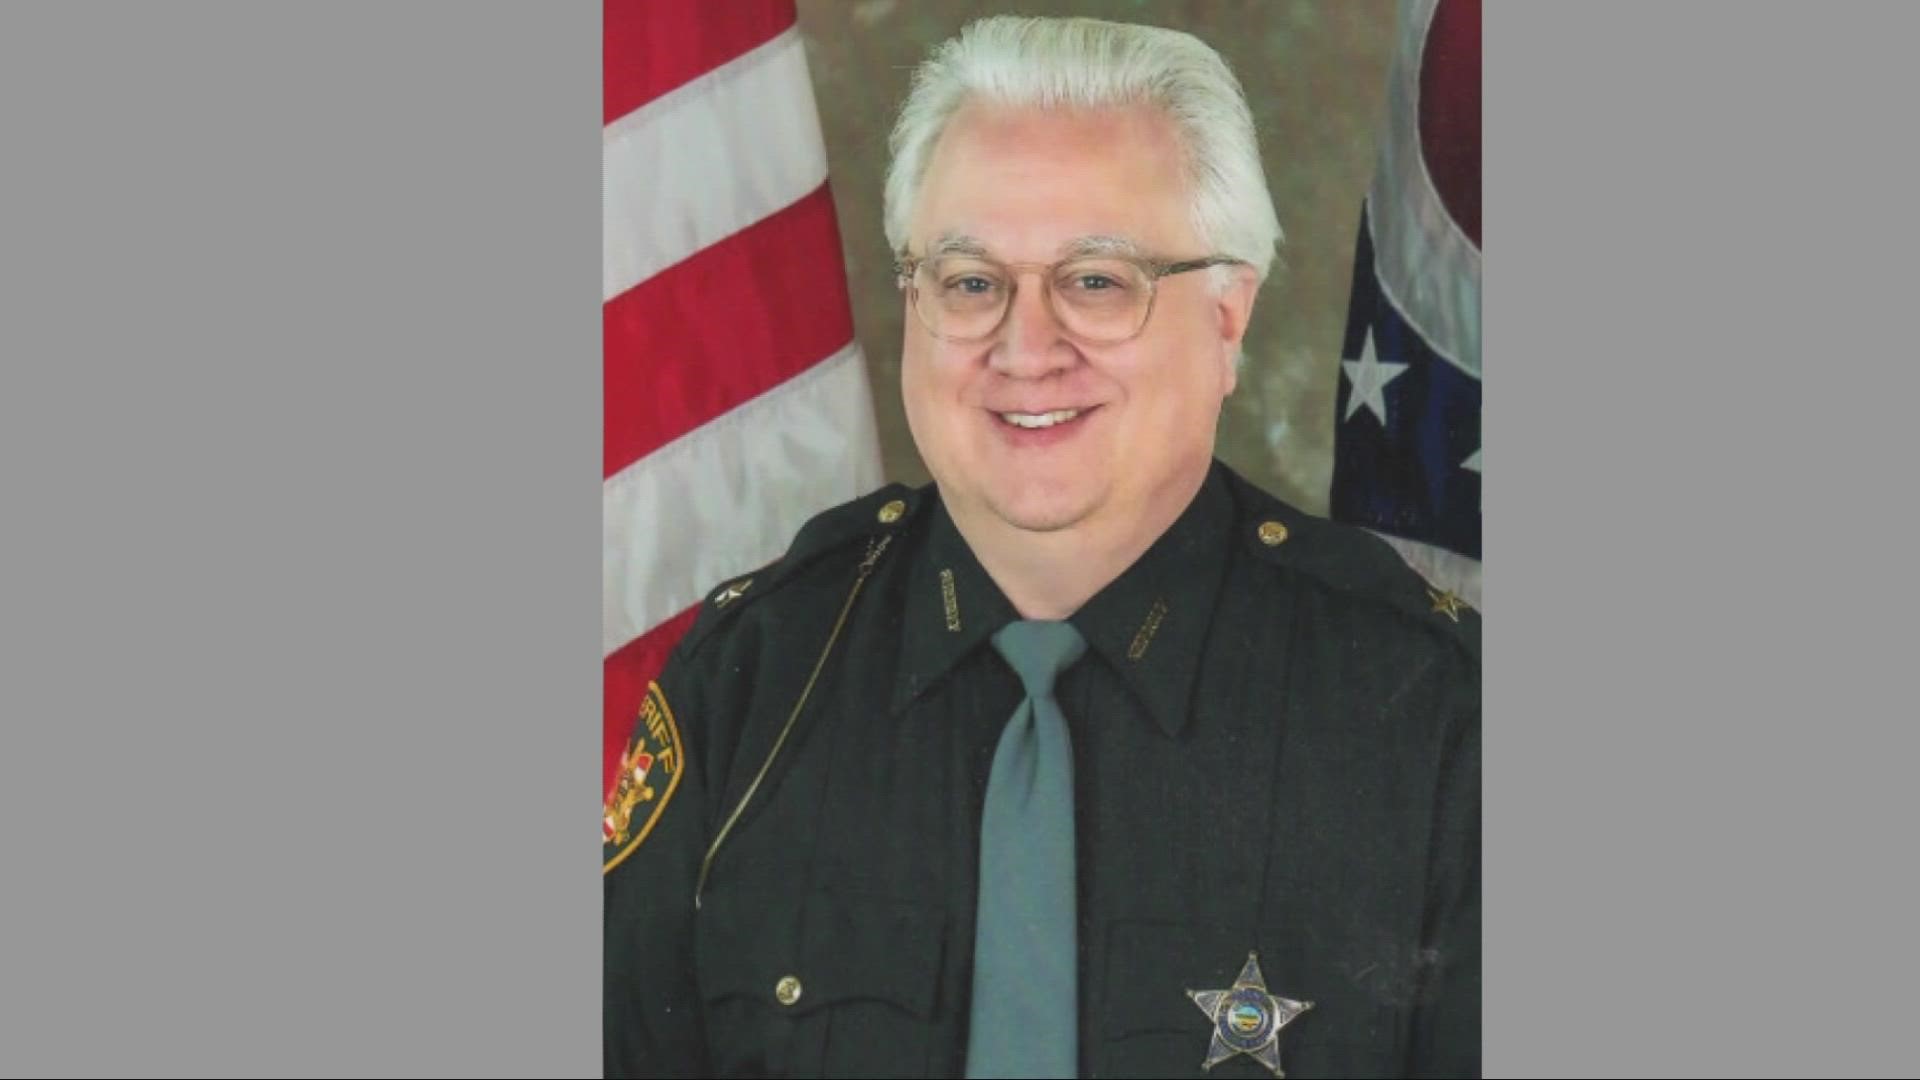 Sheriff Christopher Viland announced his resignation Friday. He is the sixth sheriff to leave office since 2010.